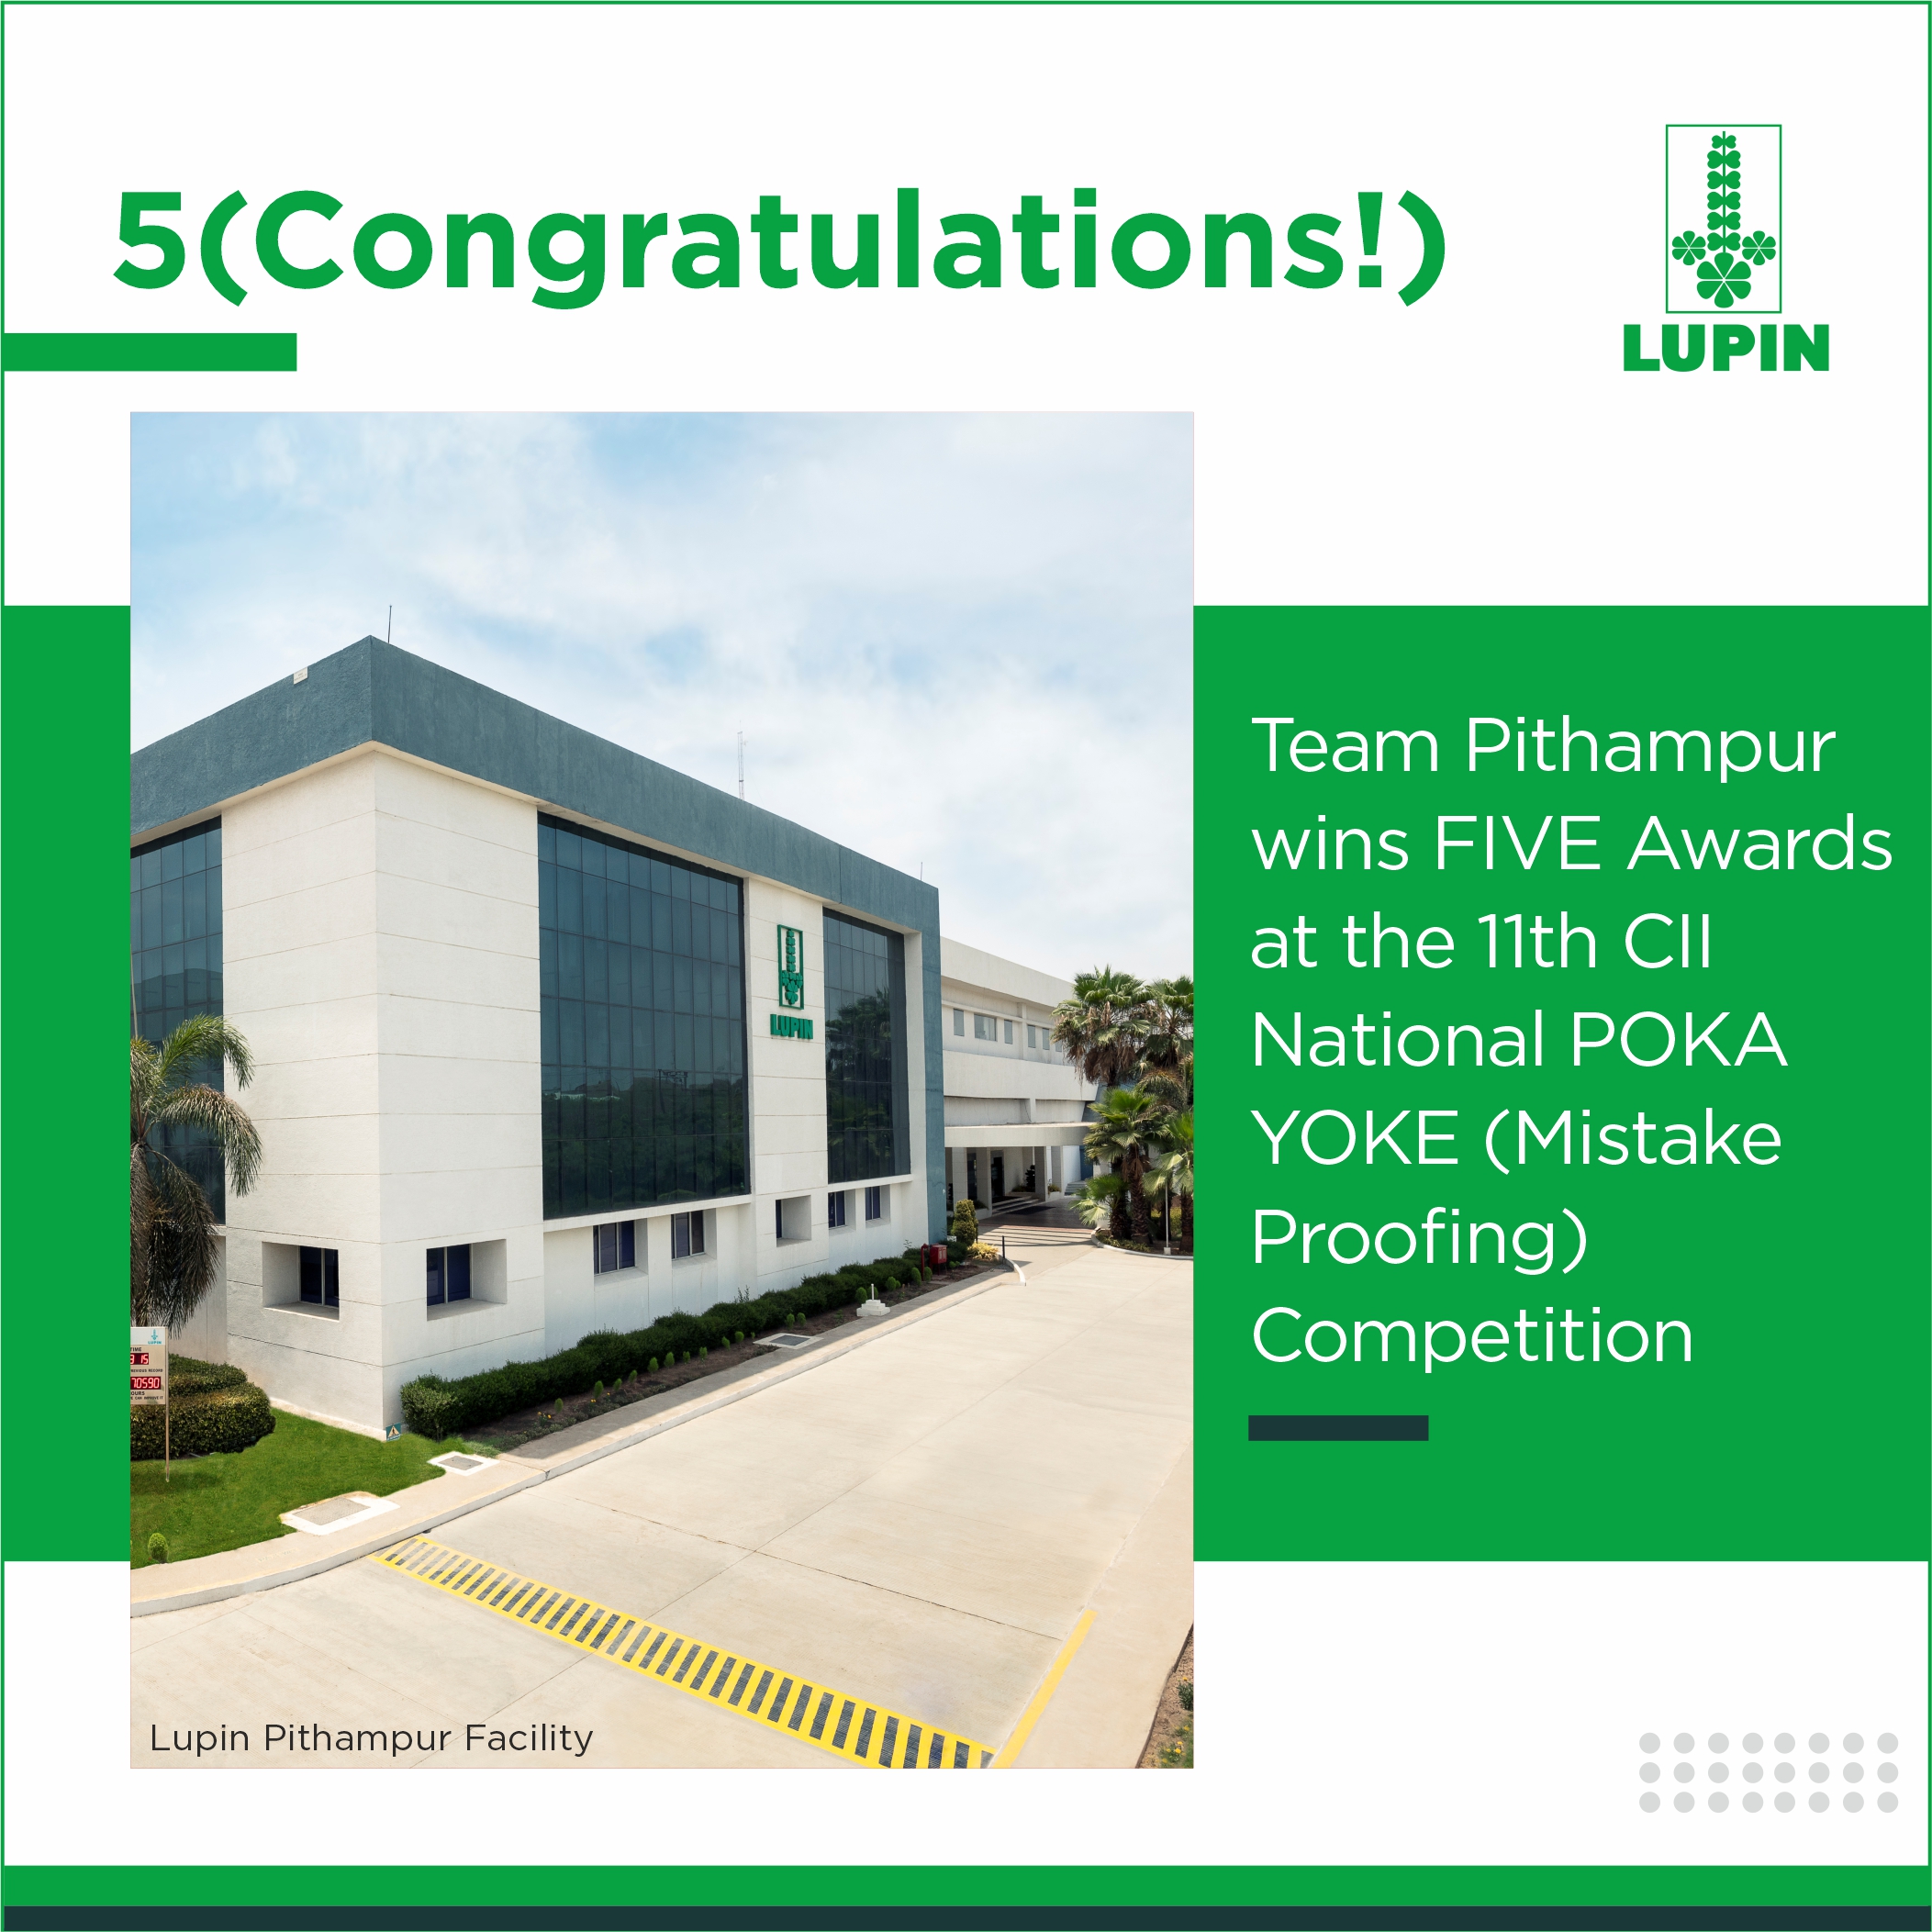 Team Pithampur wins FIVE Awards at the 11th CII National POKA YOKE (Mistake Proofing) Competition